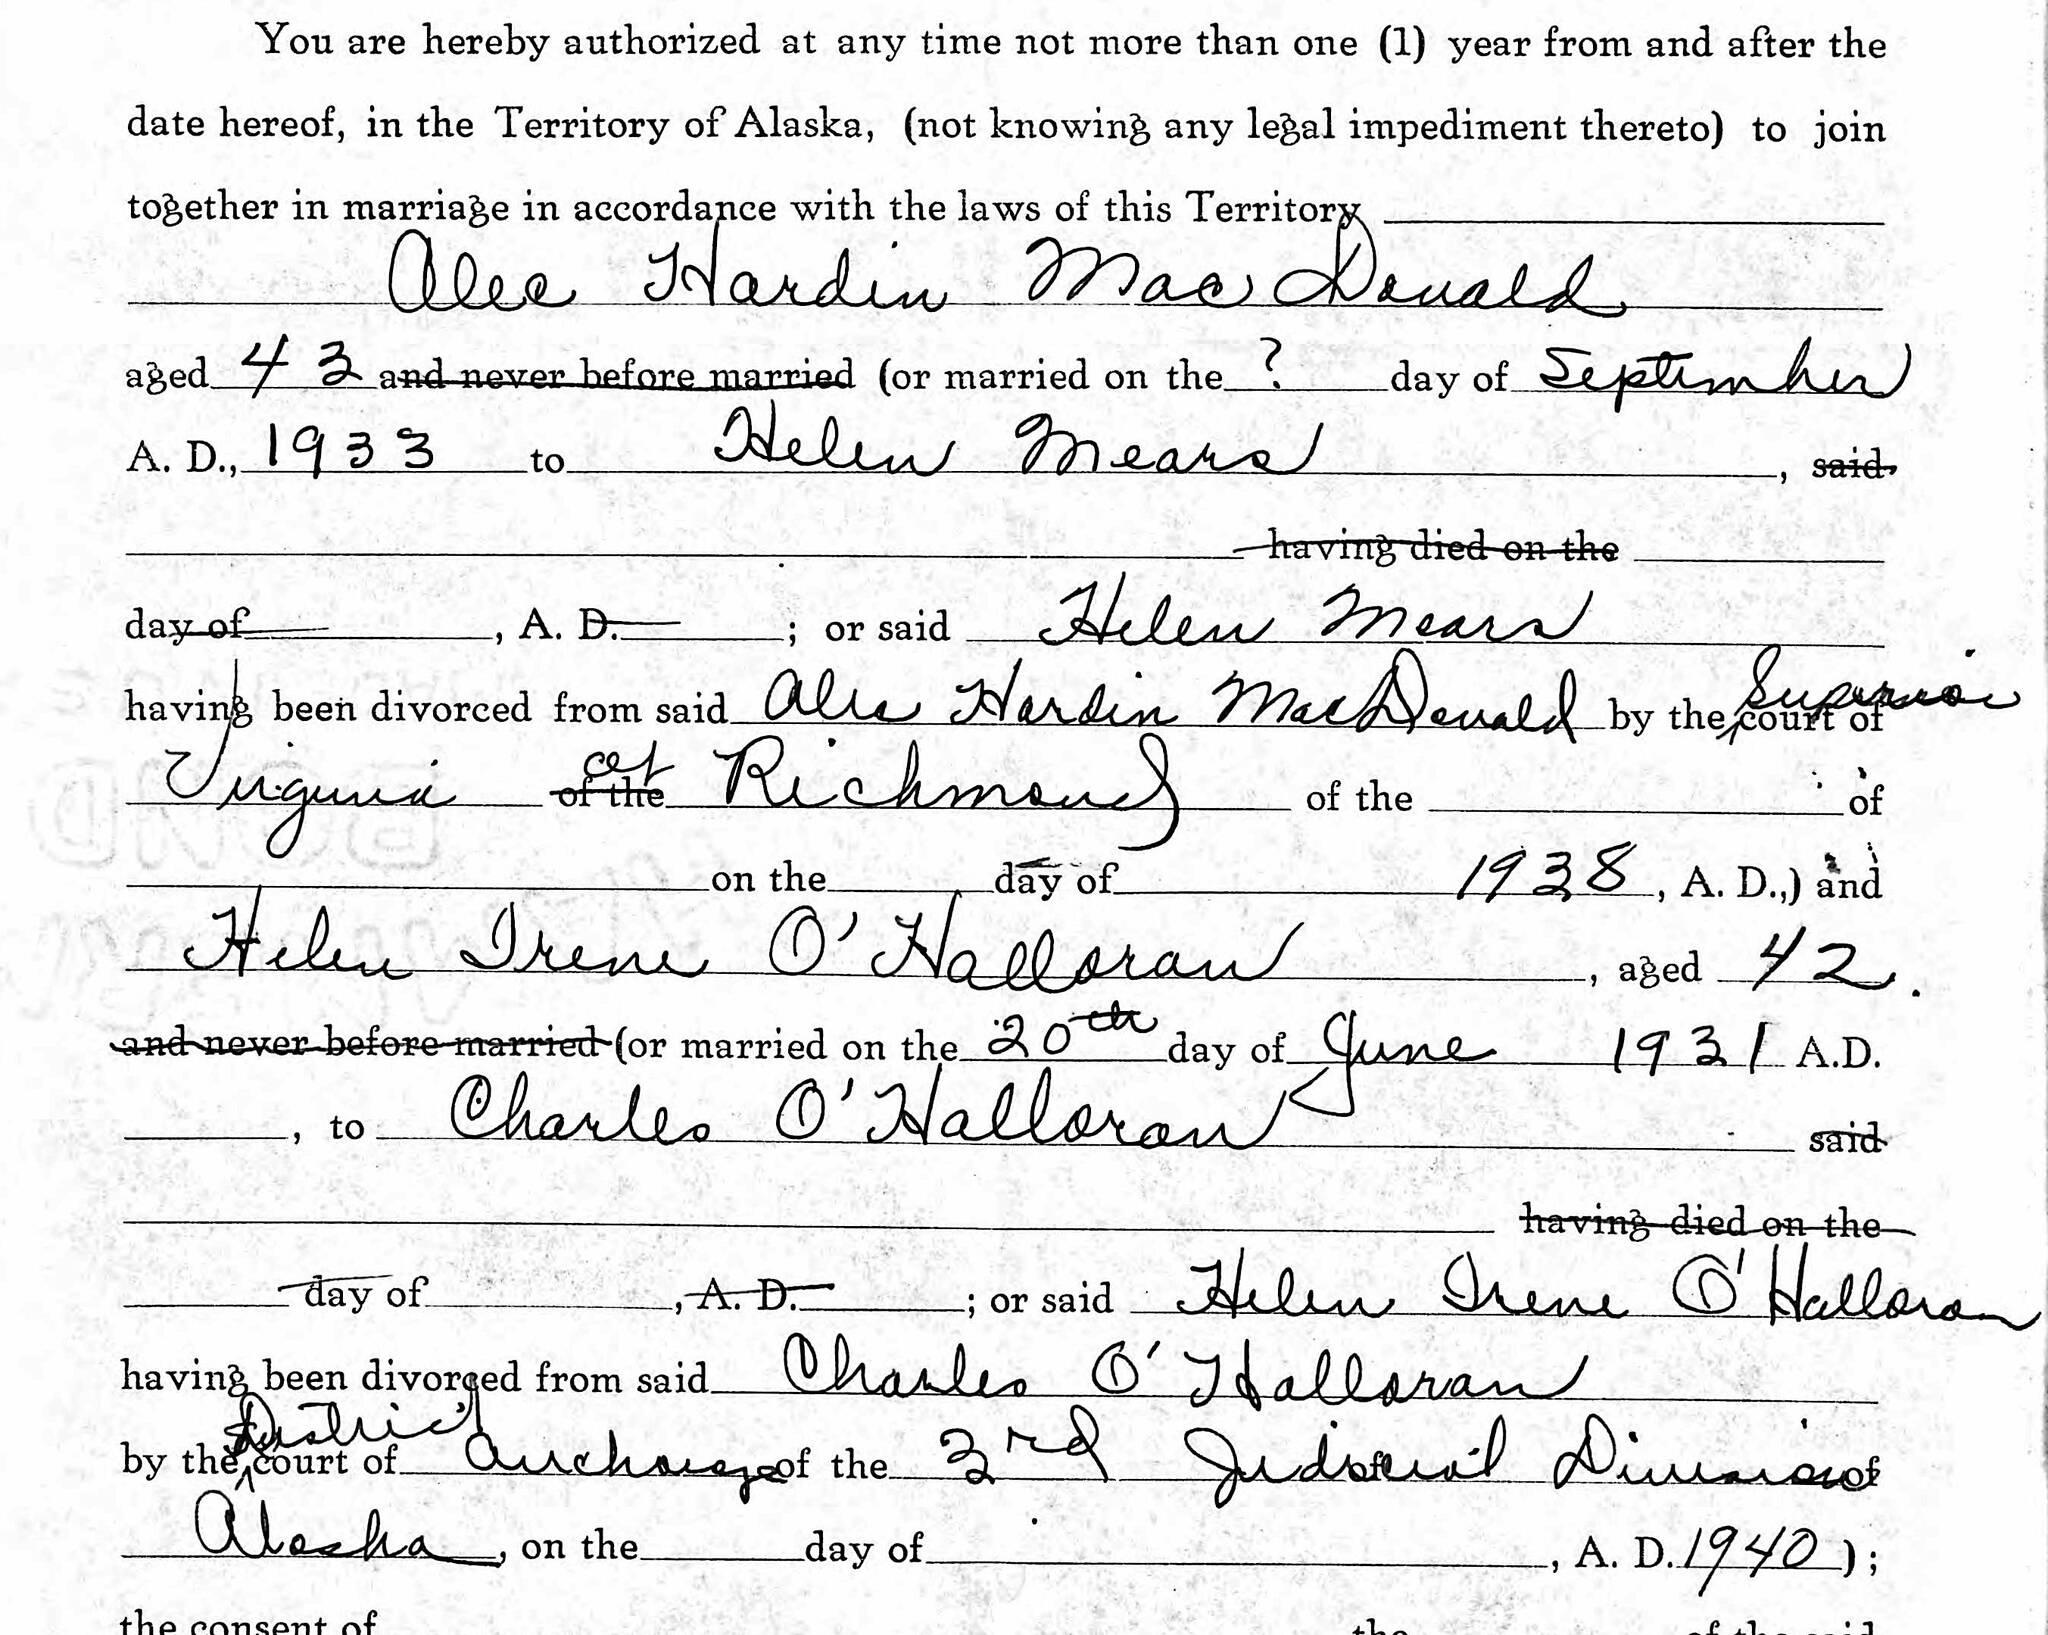 This portion of the August 1943 marriage license for Alec Hardin MacDonald and Helen Irene O’Halloran reveals that MacDonald claimed to have been previously married in 1933 to Helen Mears and to have divorced her in Richmond, Virginia, in 1938. Although the name of his former spouse and the location of his divorce were accurate, neither the marriage date or the divorce date were true.